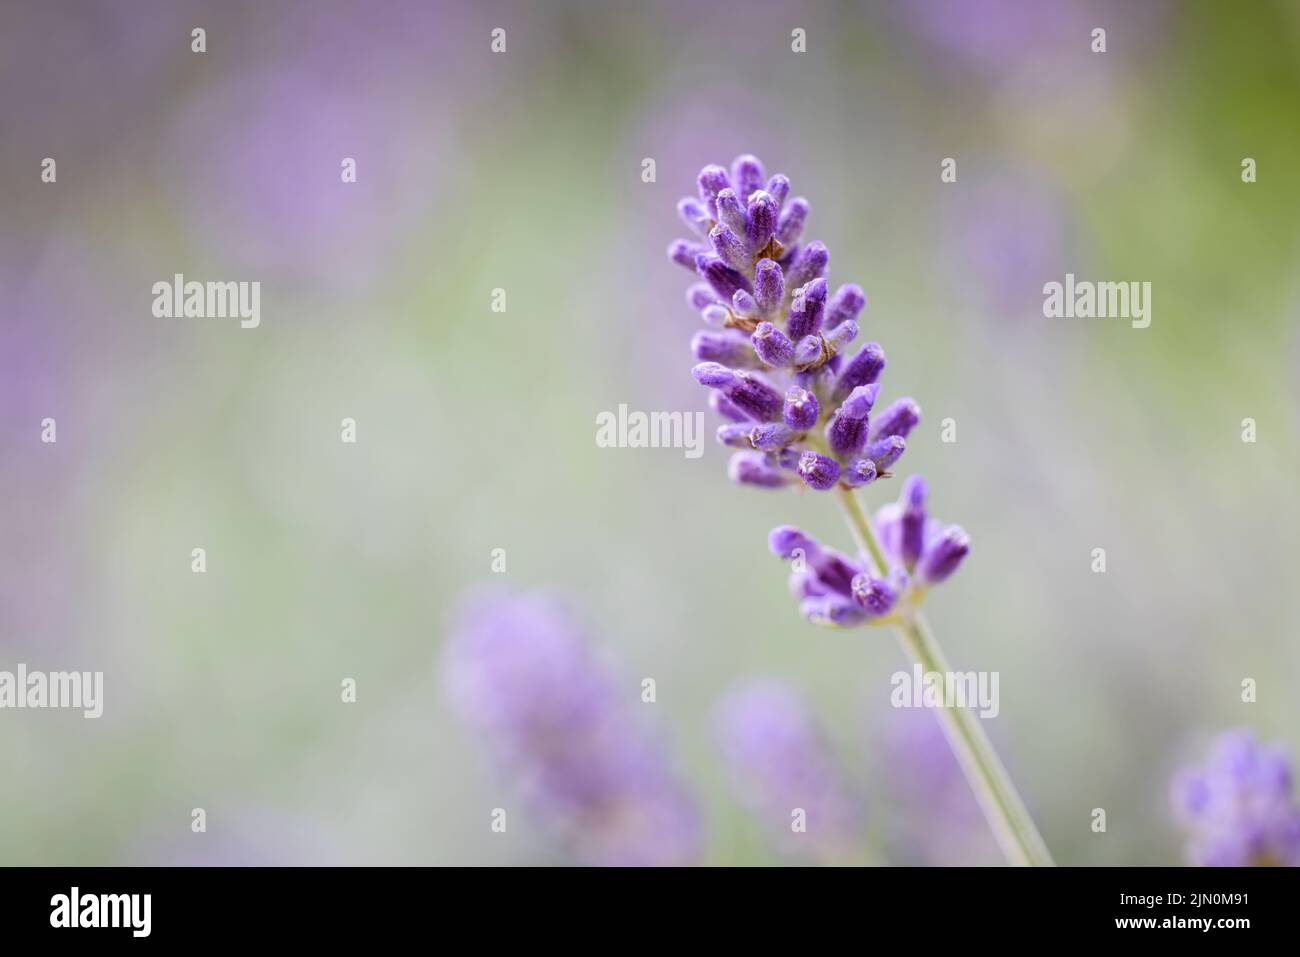 A close up of an English Lavender flower against a background of out of focus lavender flowers Stock Photo